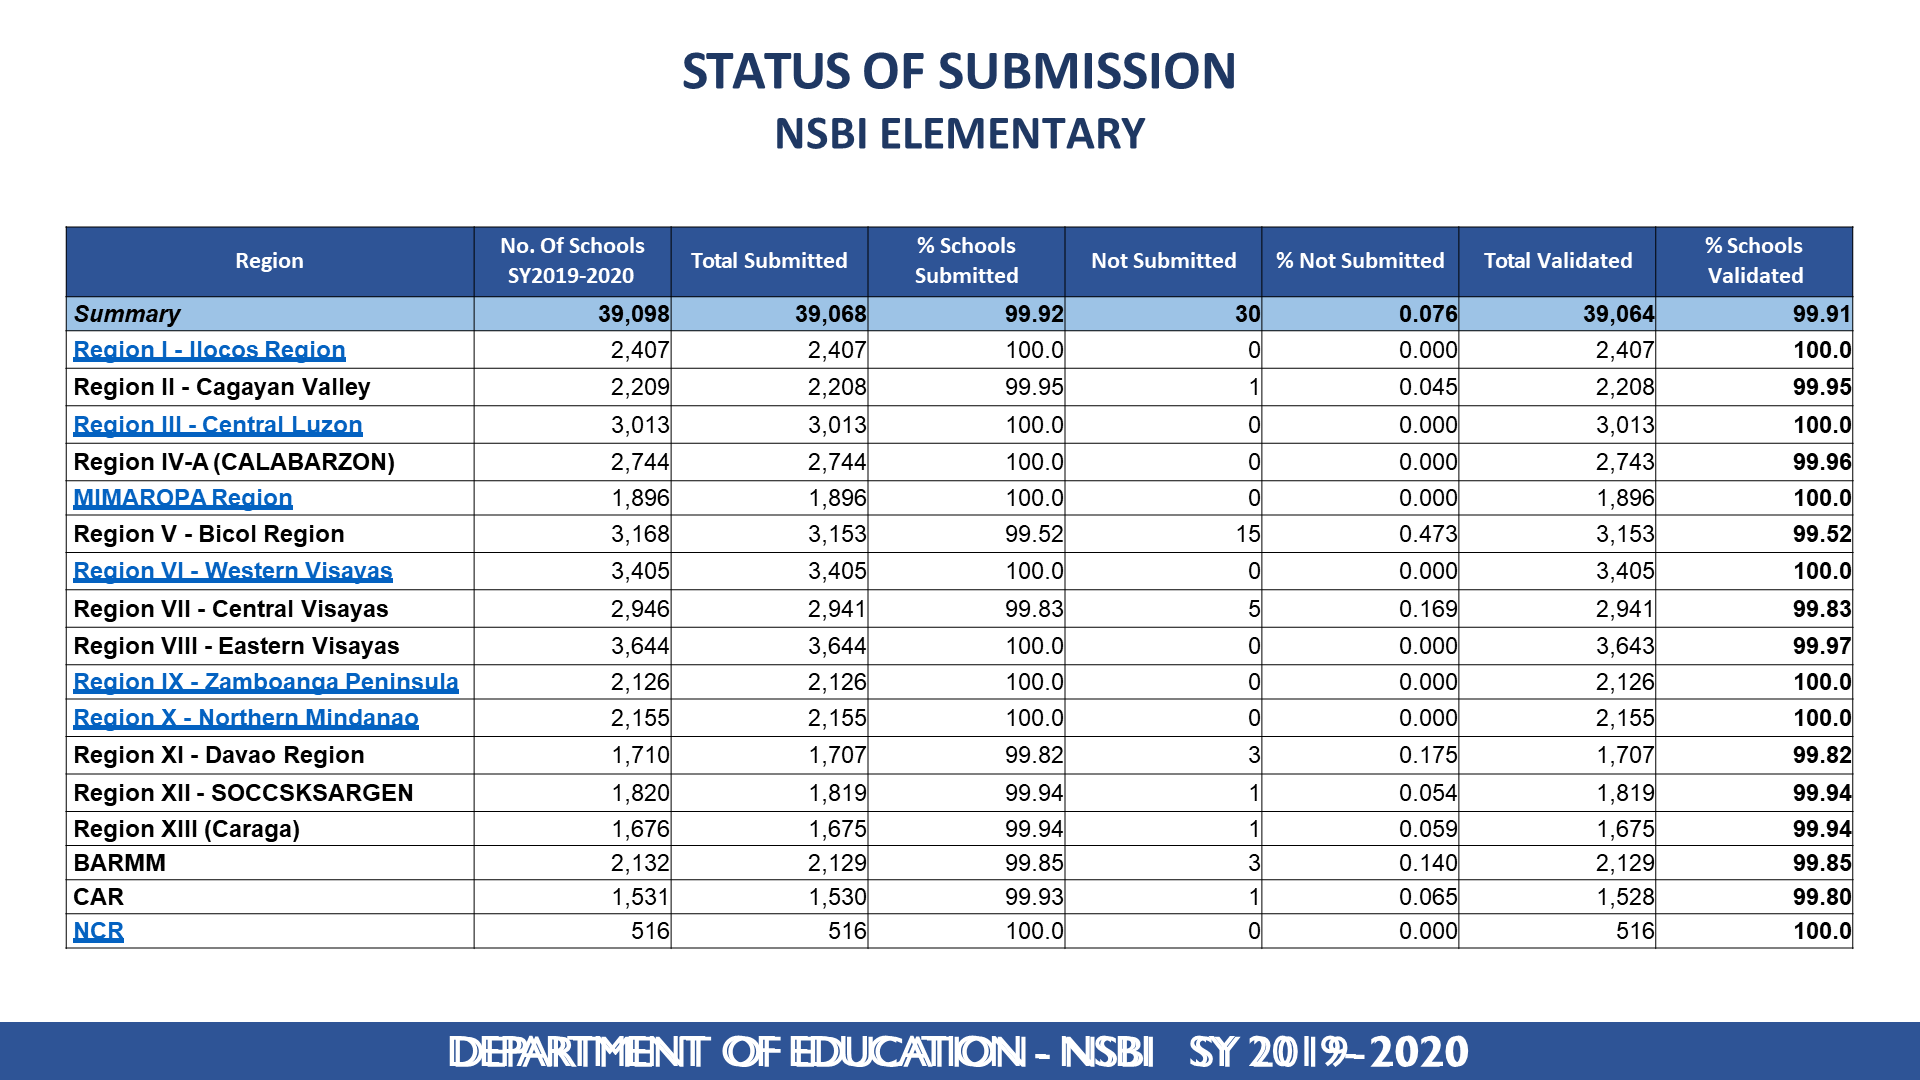 DepEd National School Building Inventory (NSBI) Status of Submission